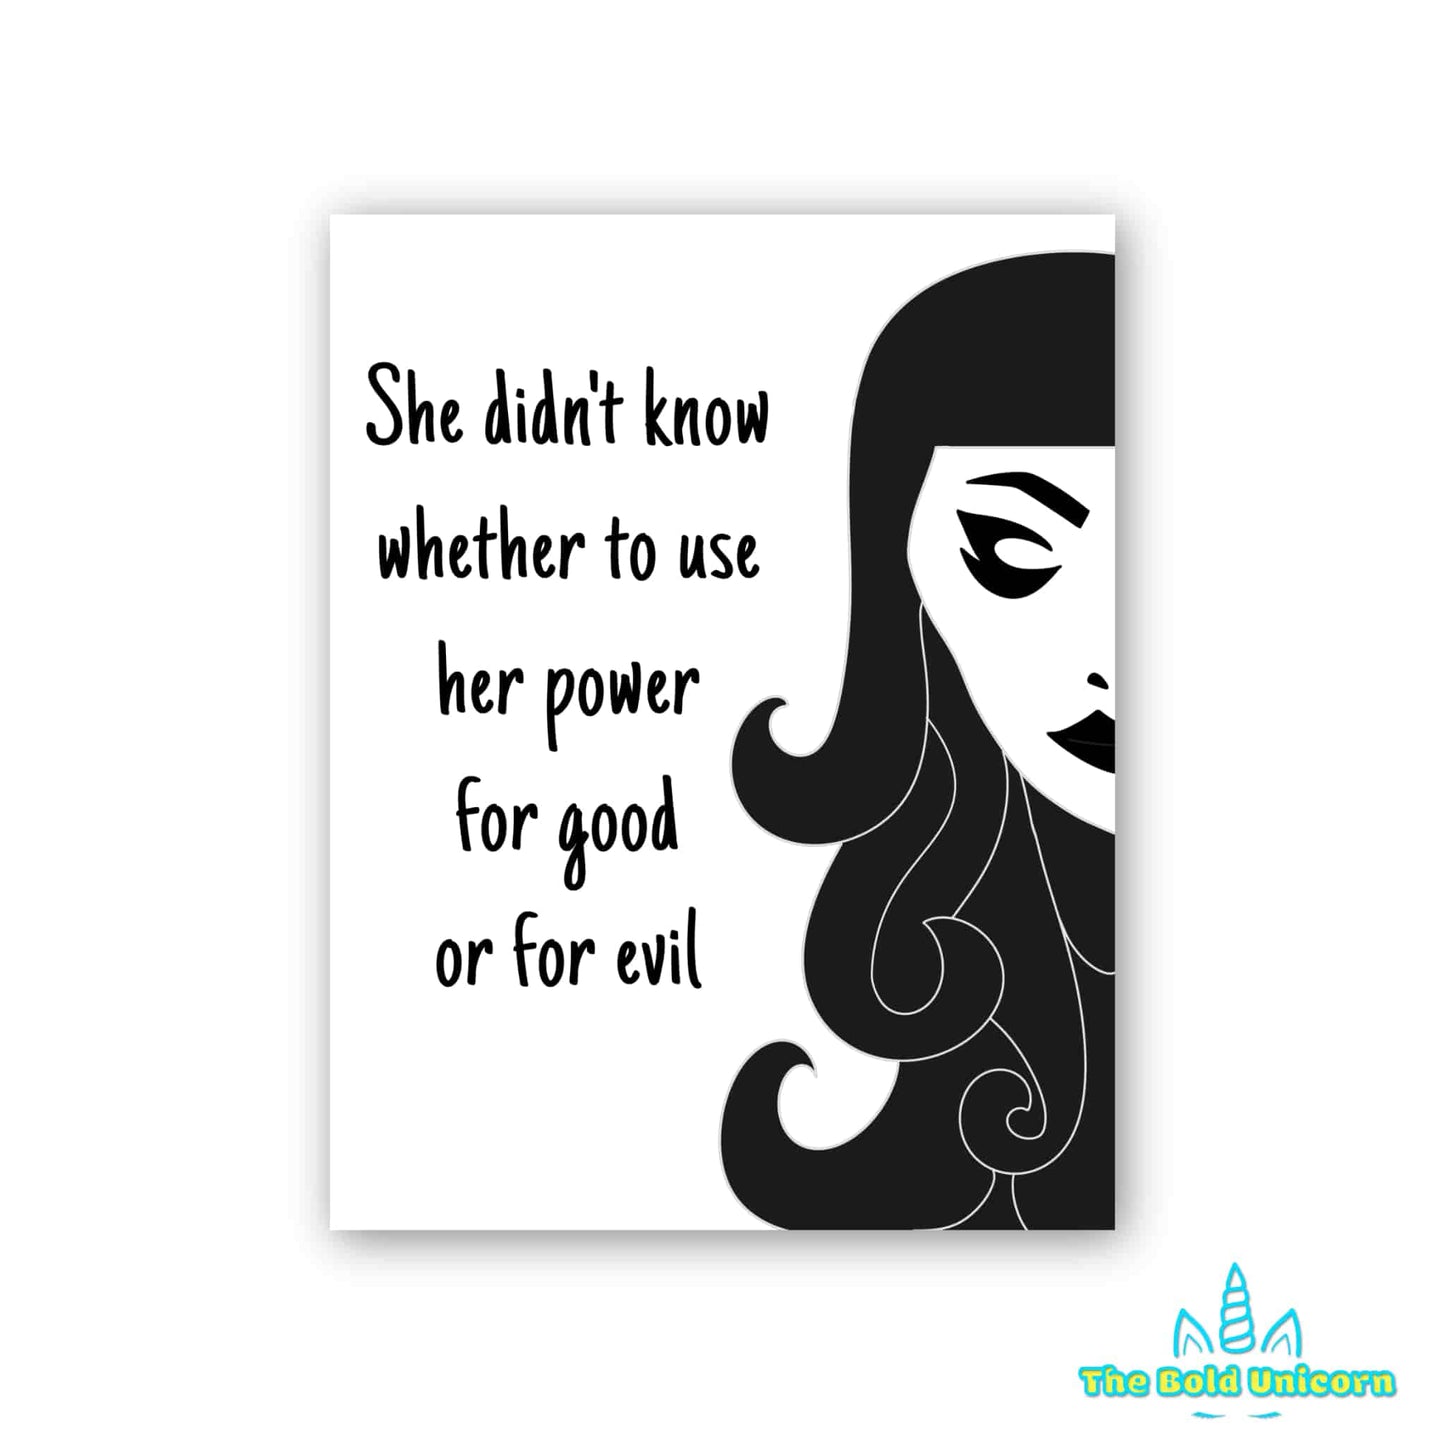 She didn't know whether to use her power for good or for evil